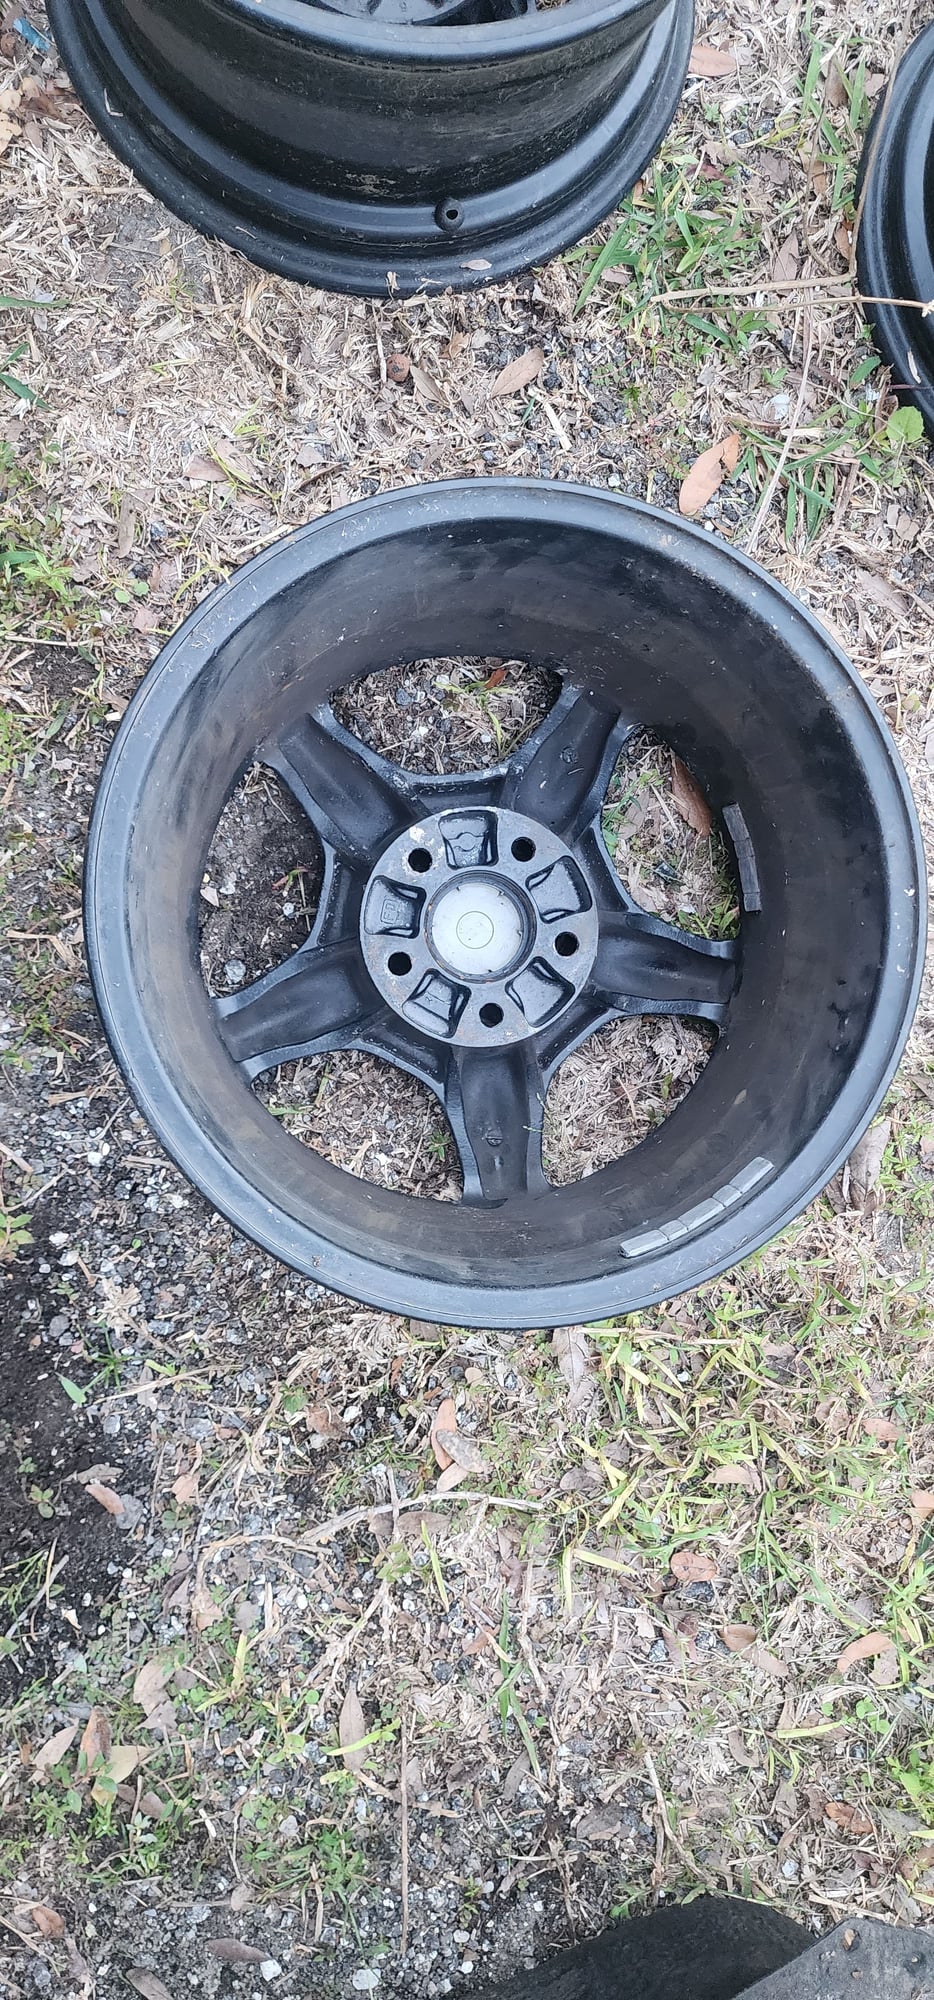 Wheels and Tires/Axles - OEM FD3S Wheels (Lightweight) Style and Spare Aluminum Wheel - Used - 1992 to 1995 Mazda RX-7 - Kissimmee, FL 34734, United States